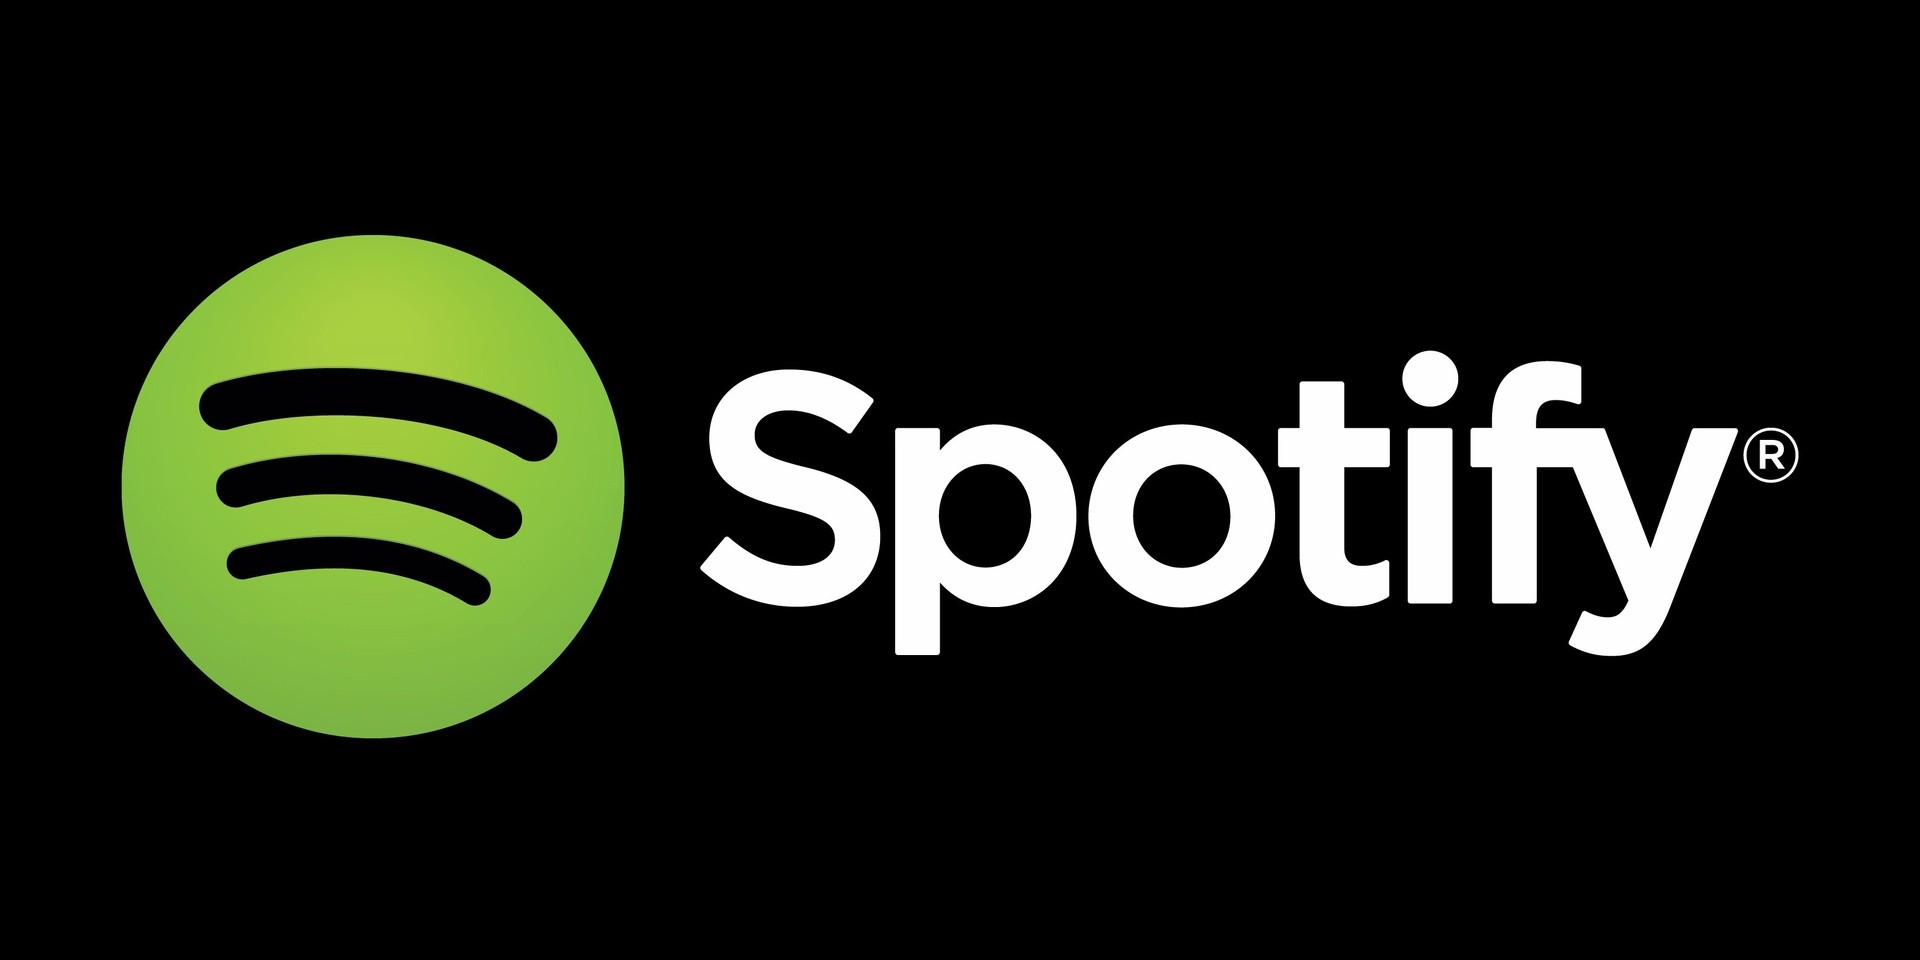 Spotify removes white supremacist "hate music" from platform